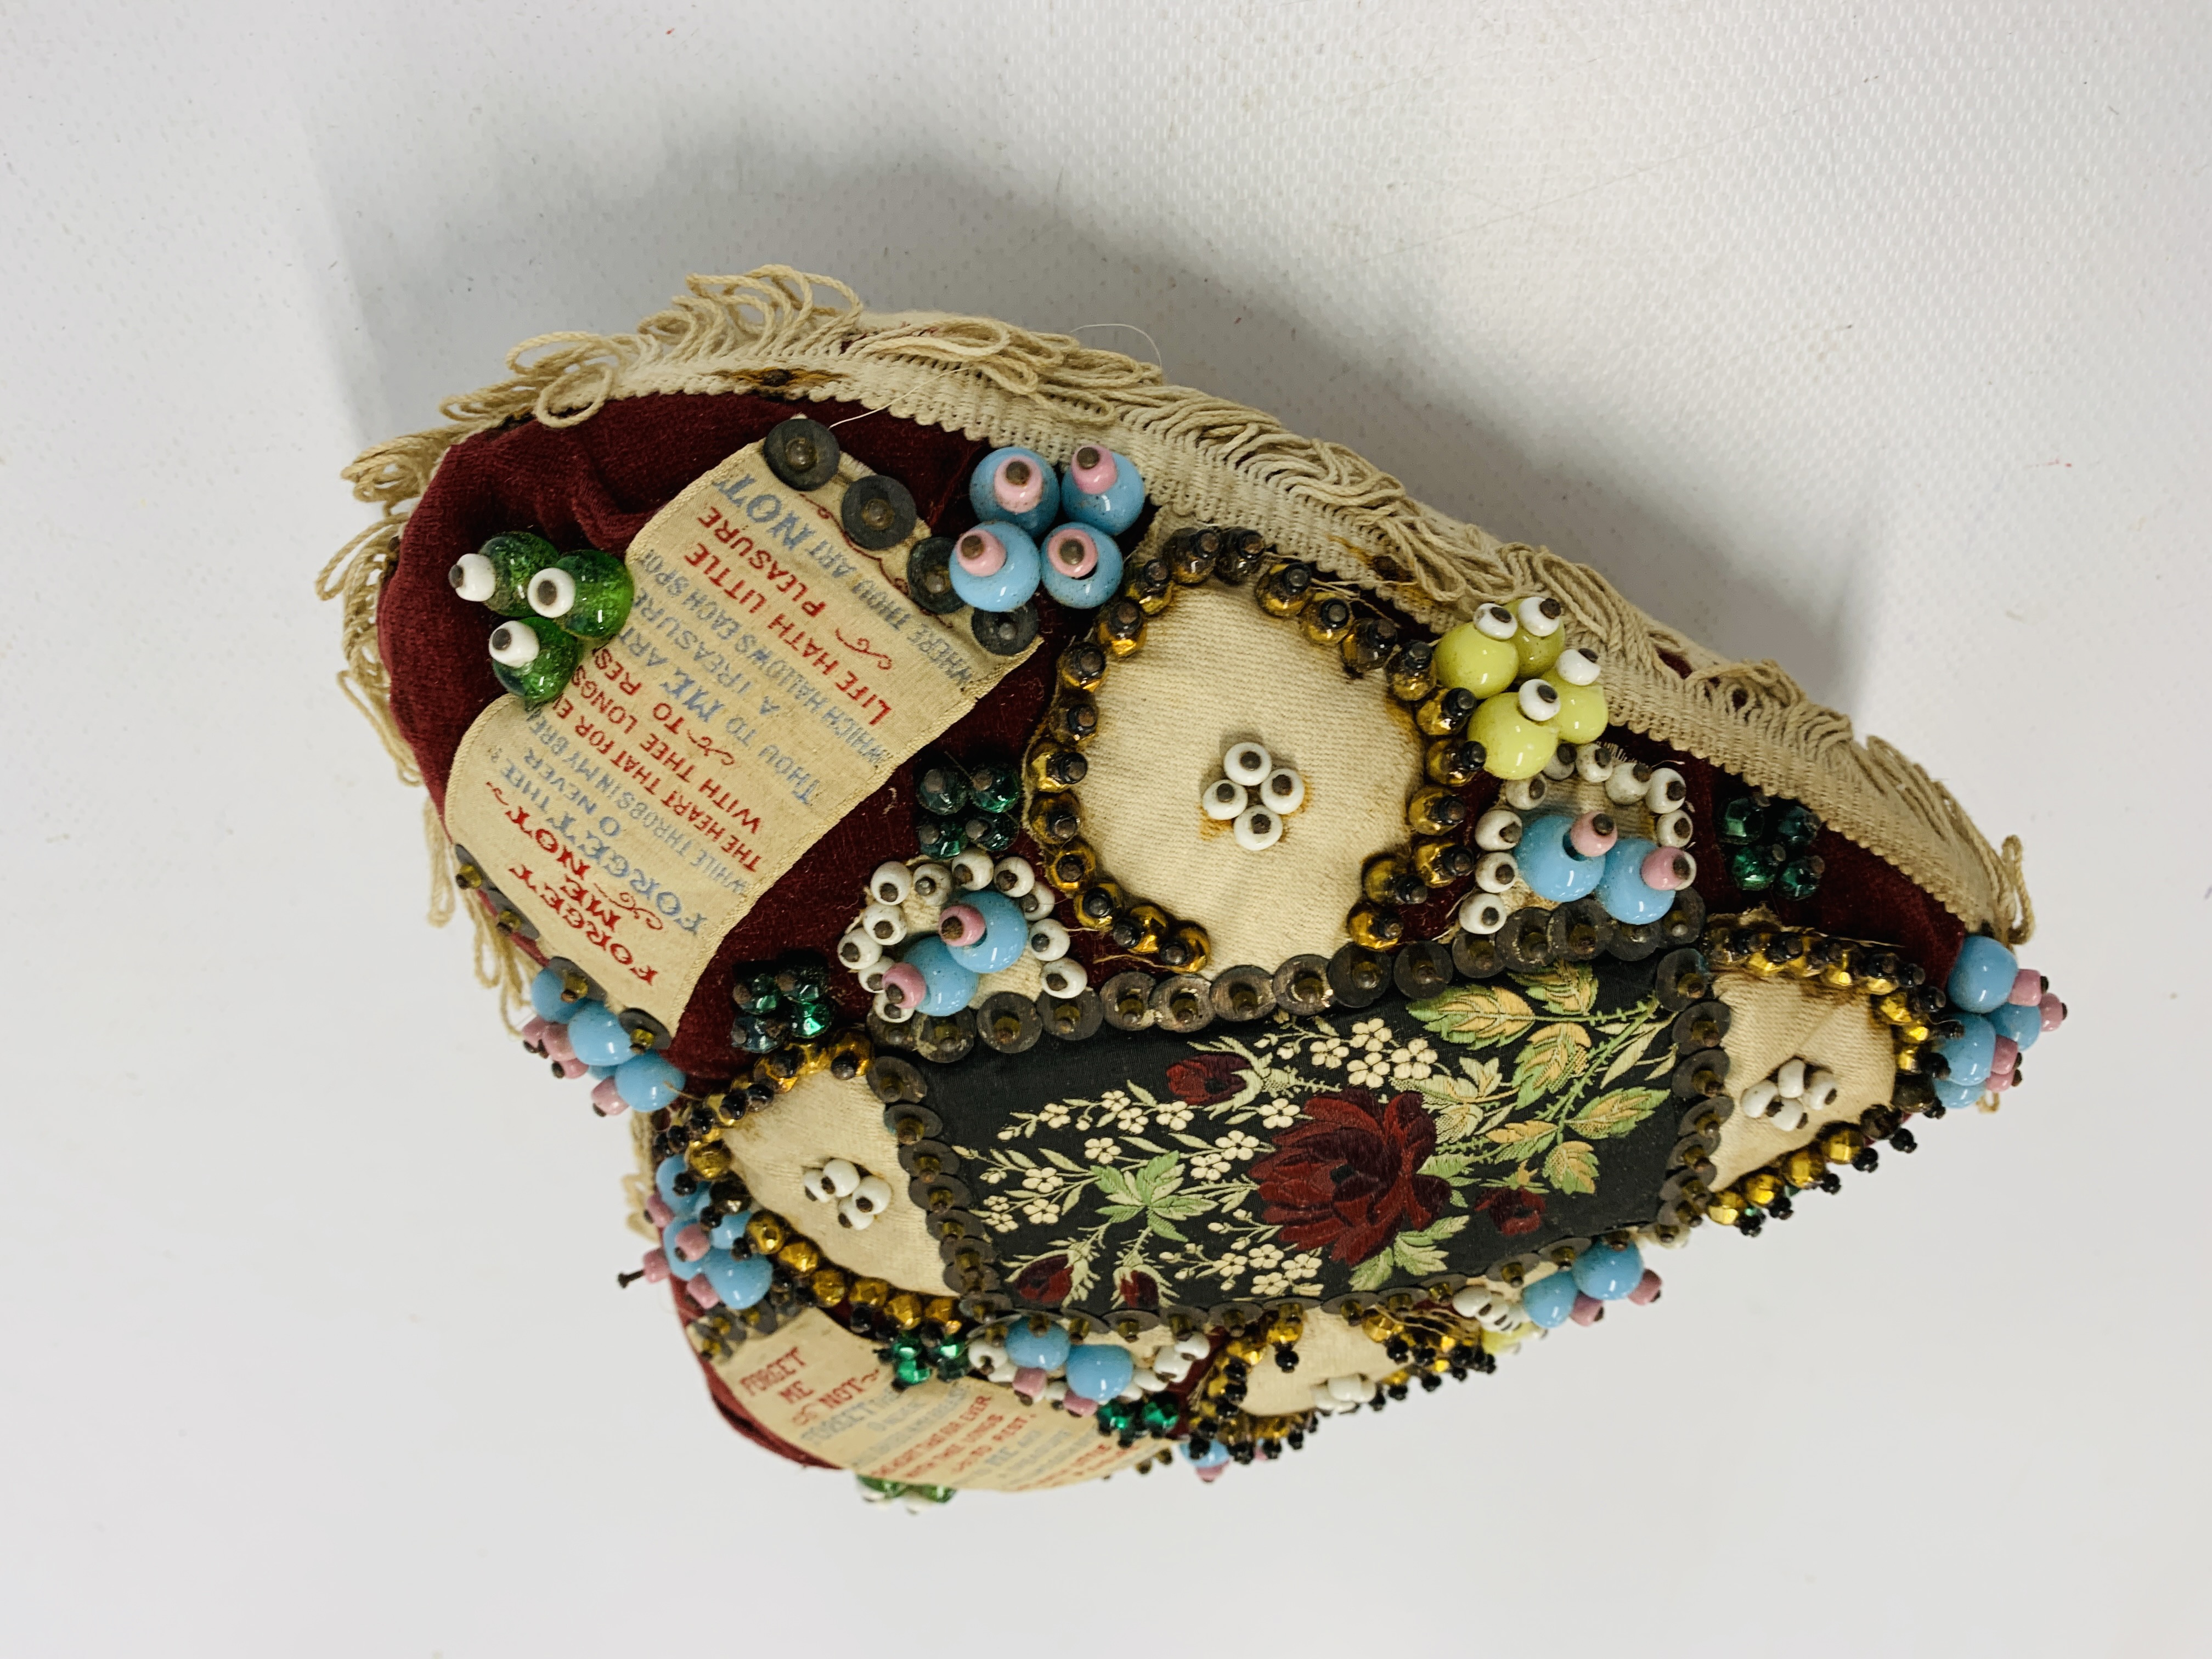 VINTAGE SWEETHEART CUSHION WITH BEADED DETAIL - Image 4 of 5